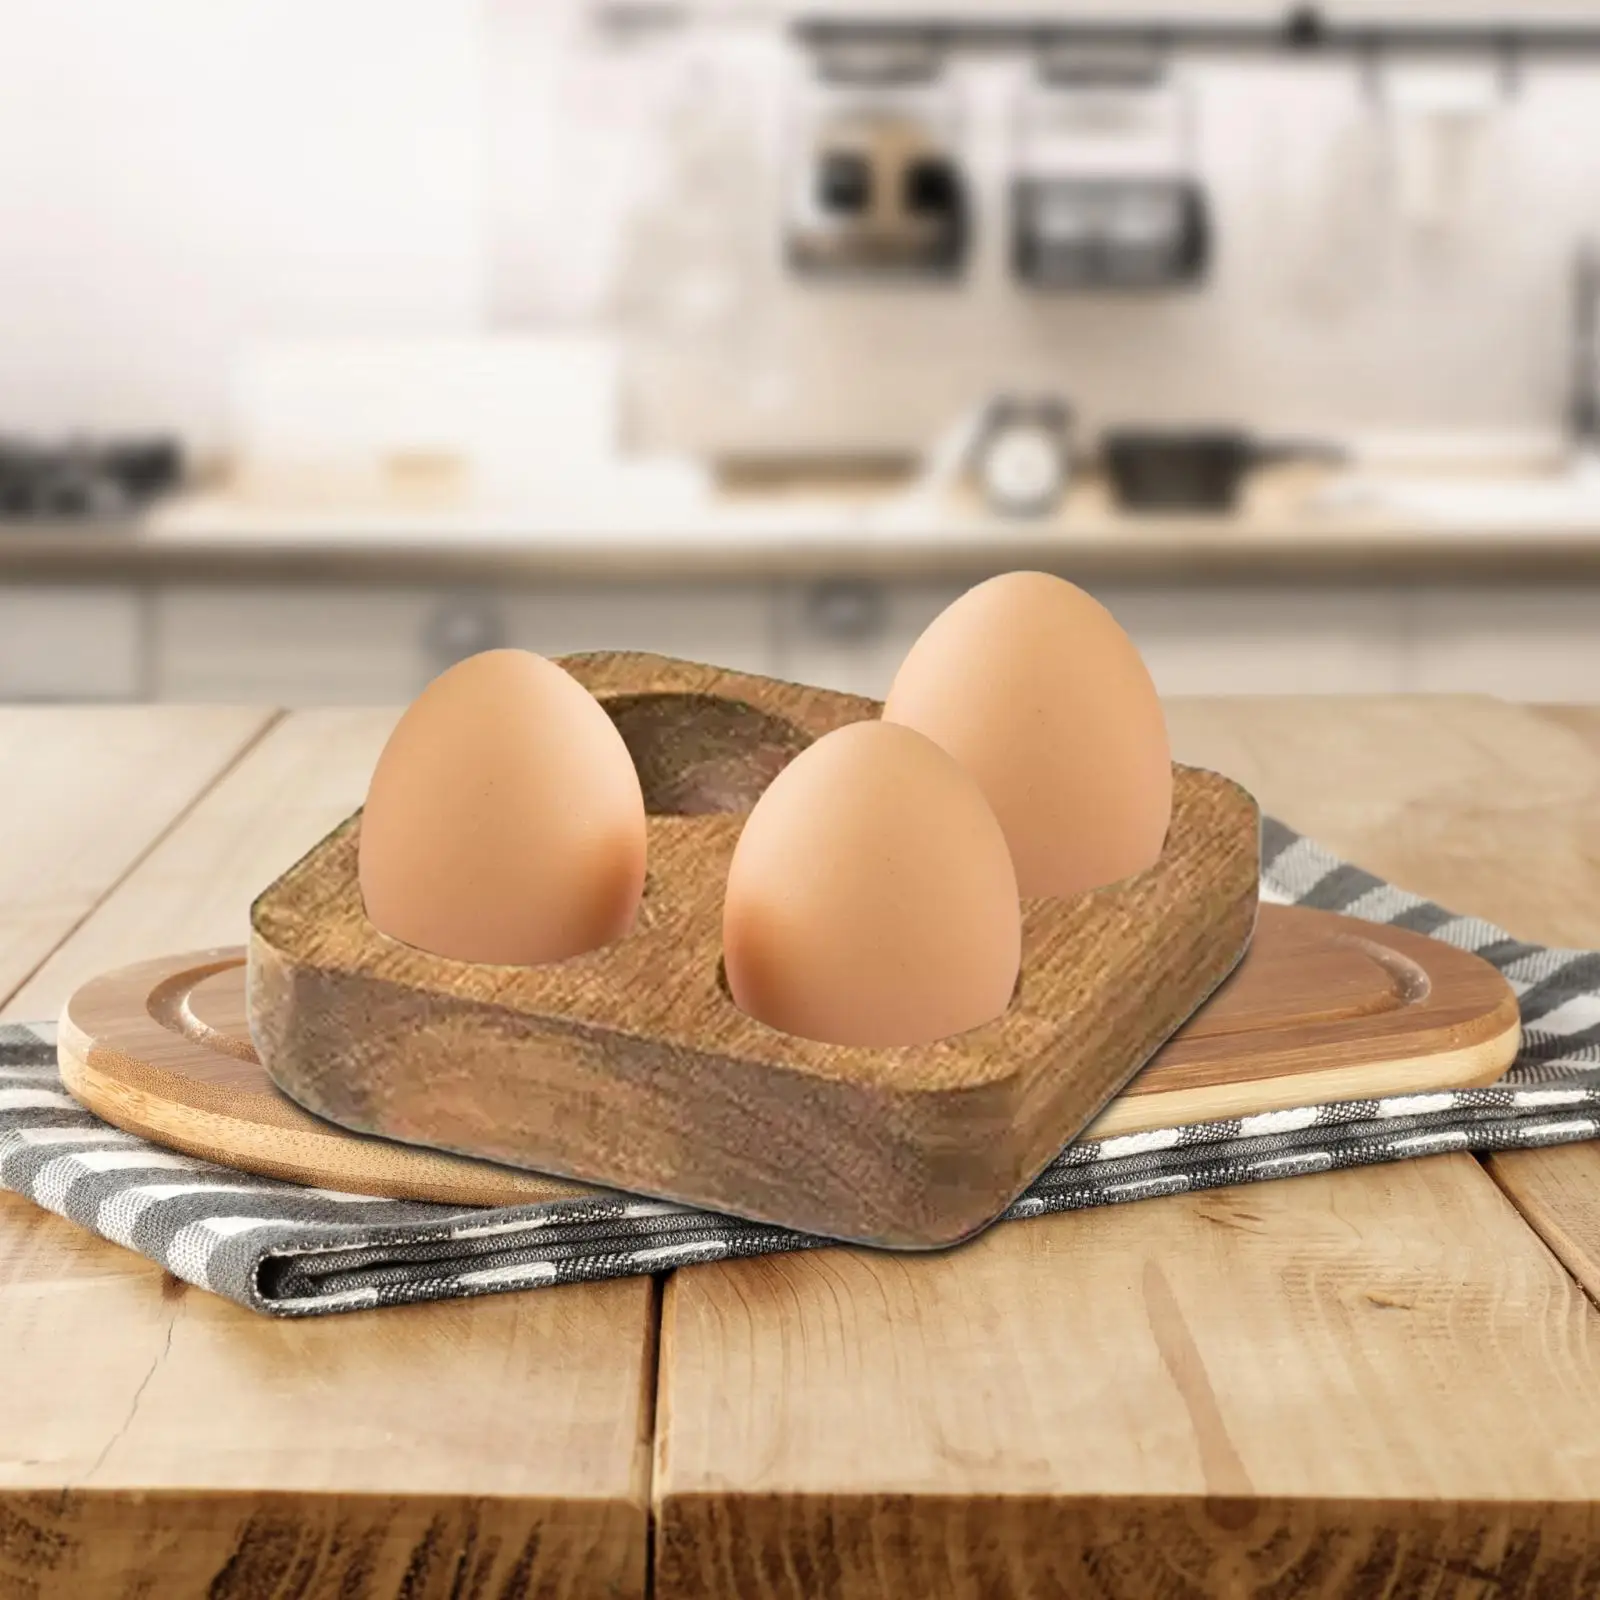 Wooden Egg Holder 4 Grid Double Row Portable Egg Storage Tray Egg Container for Tabletop Restaurant Kitchen Refrigerator Fridge